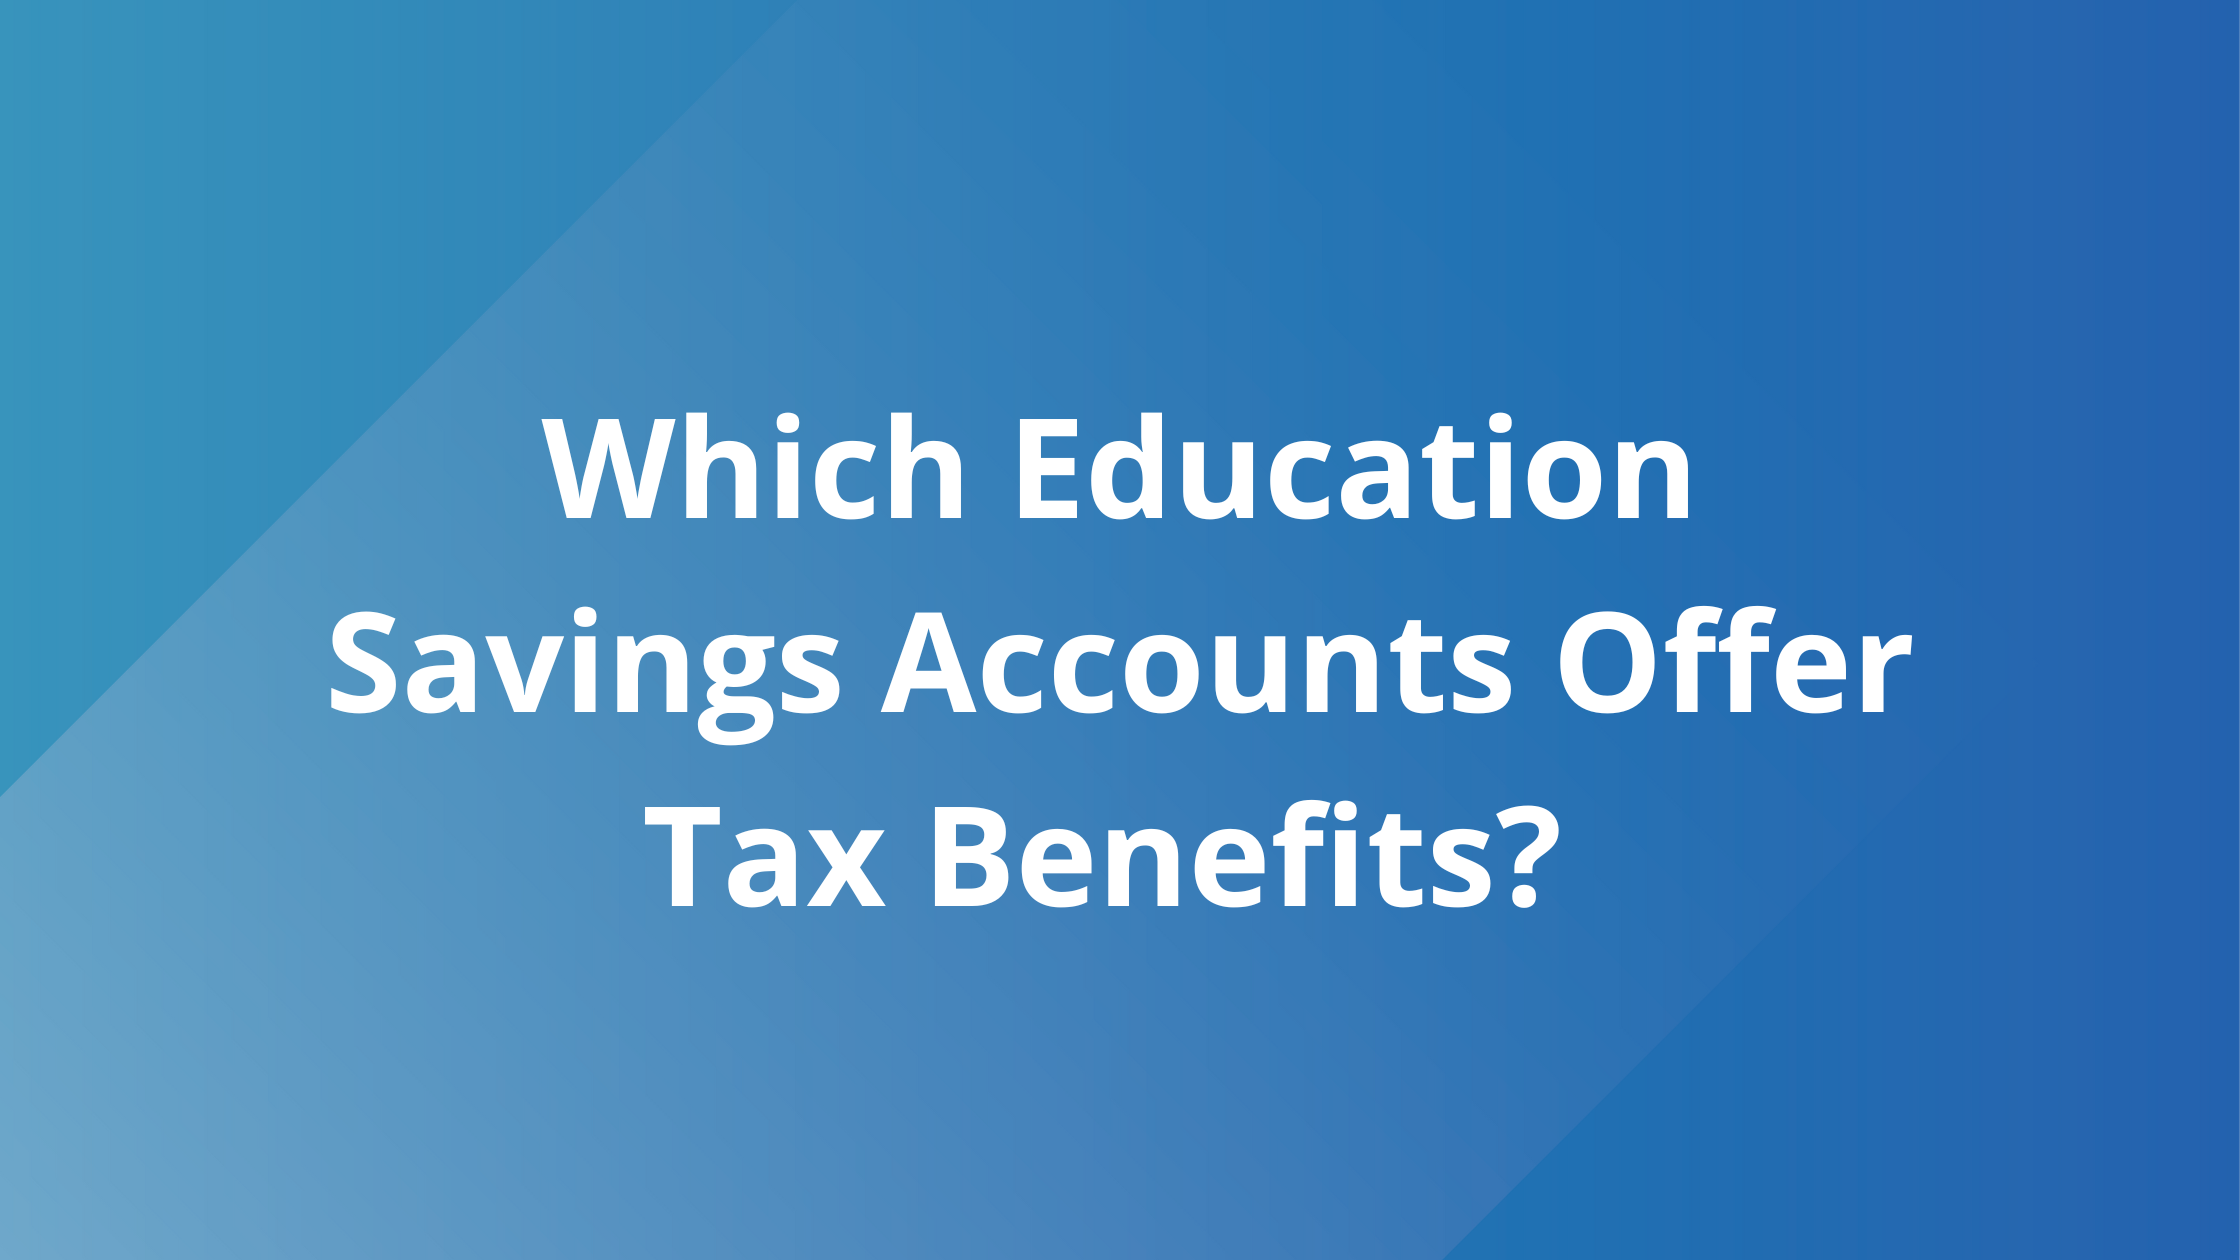 Which Education Savings Accounts Offer Tax Benefits?